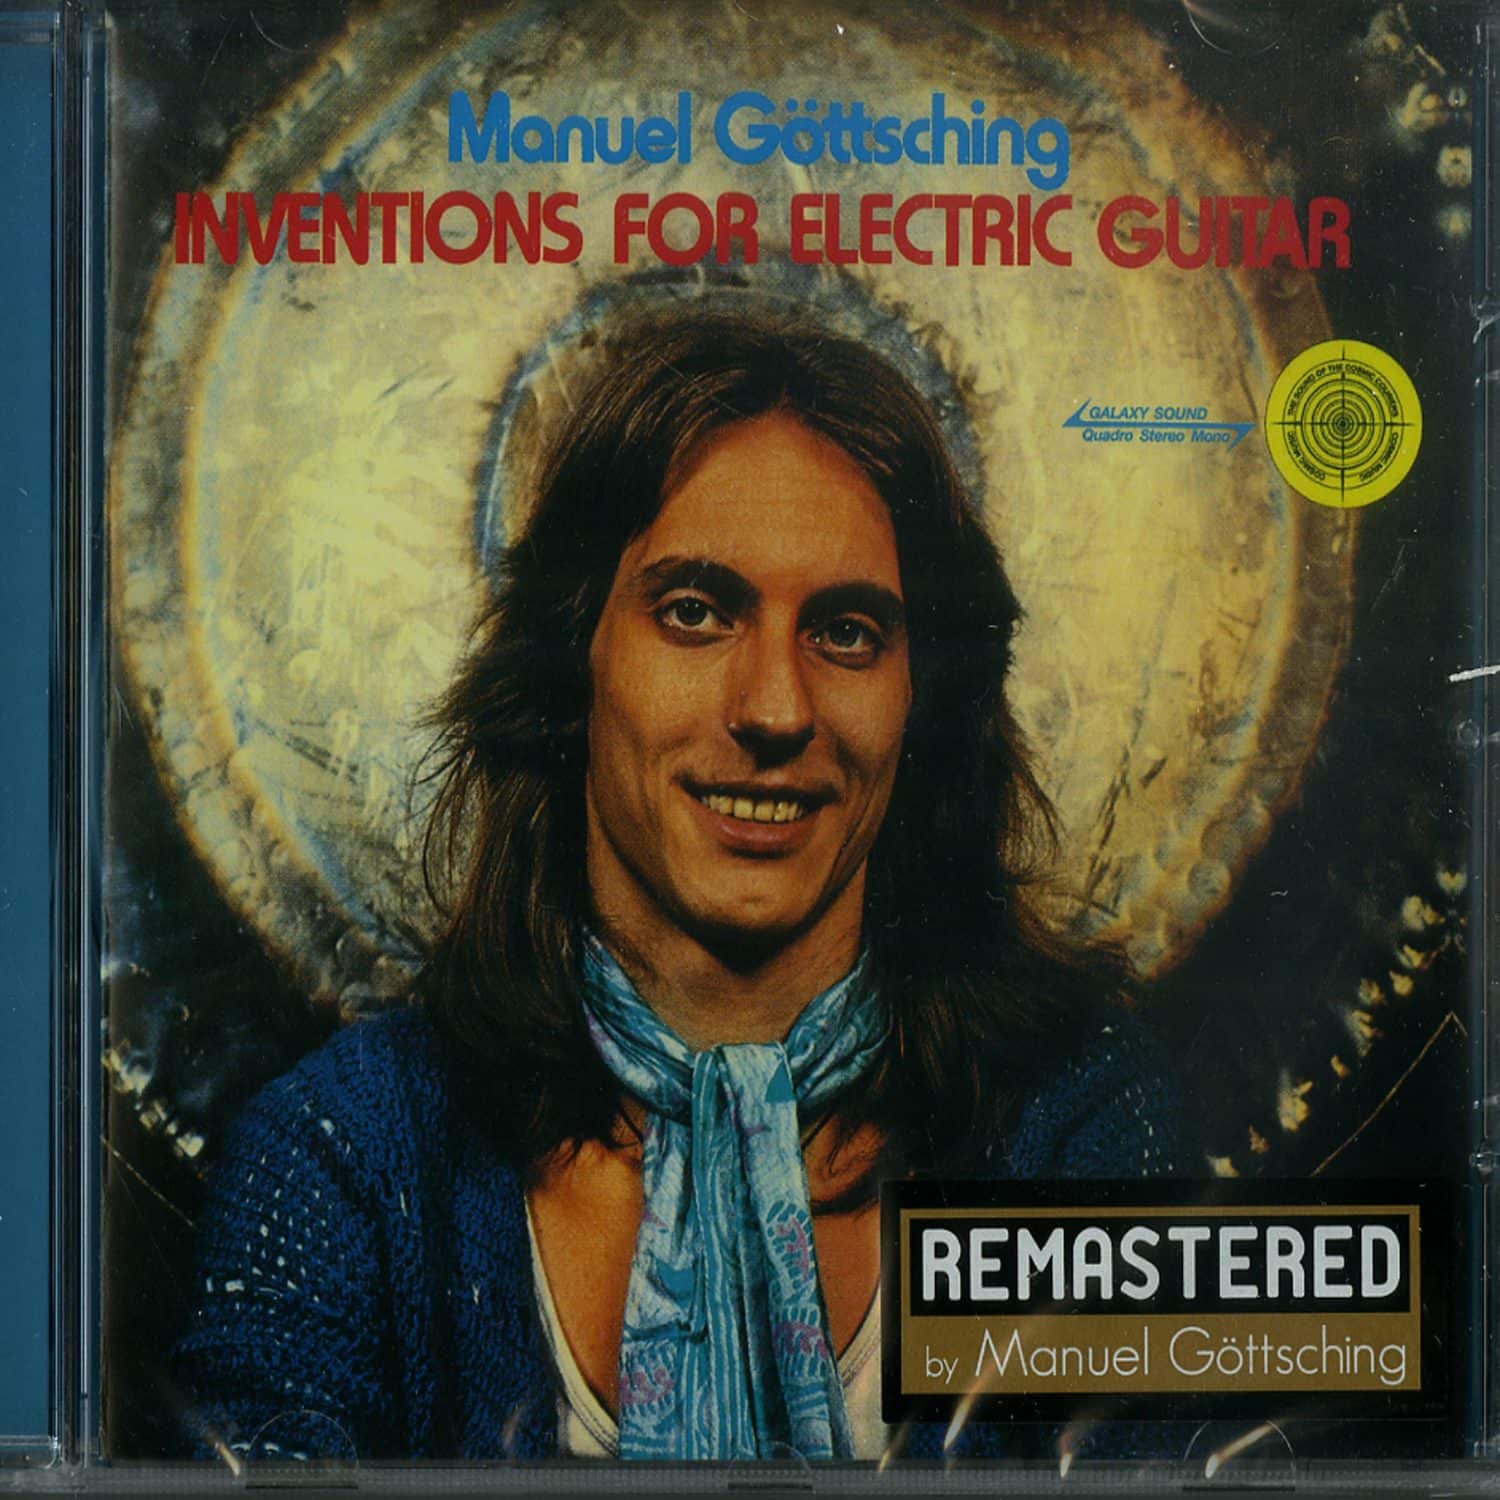 Manuel Goettsching - INVENTIONS FOR ELECTRIC GUITAR 